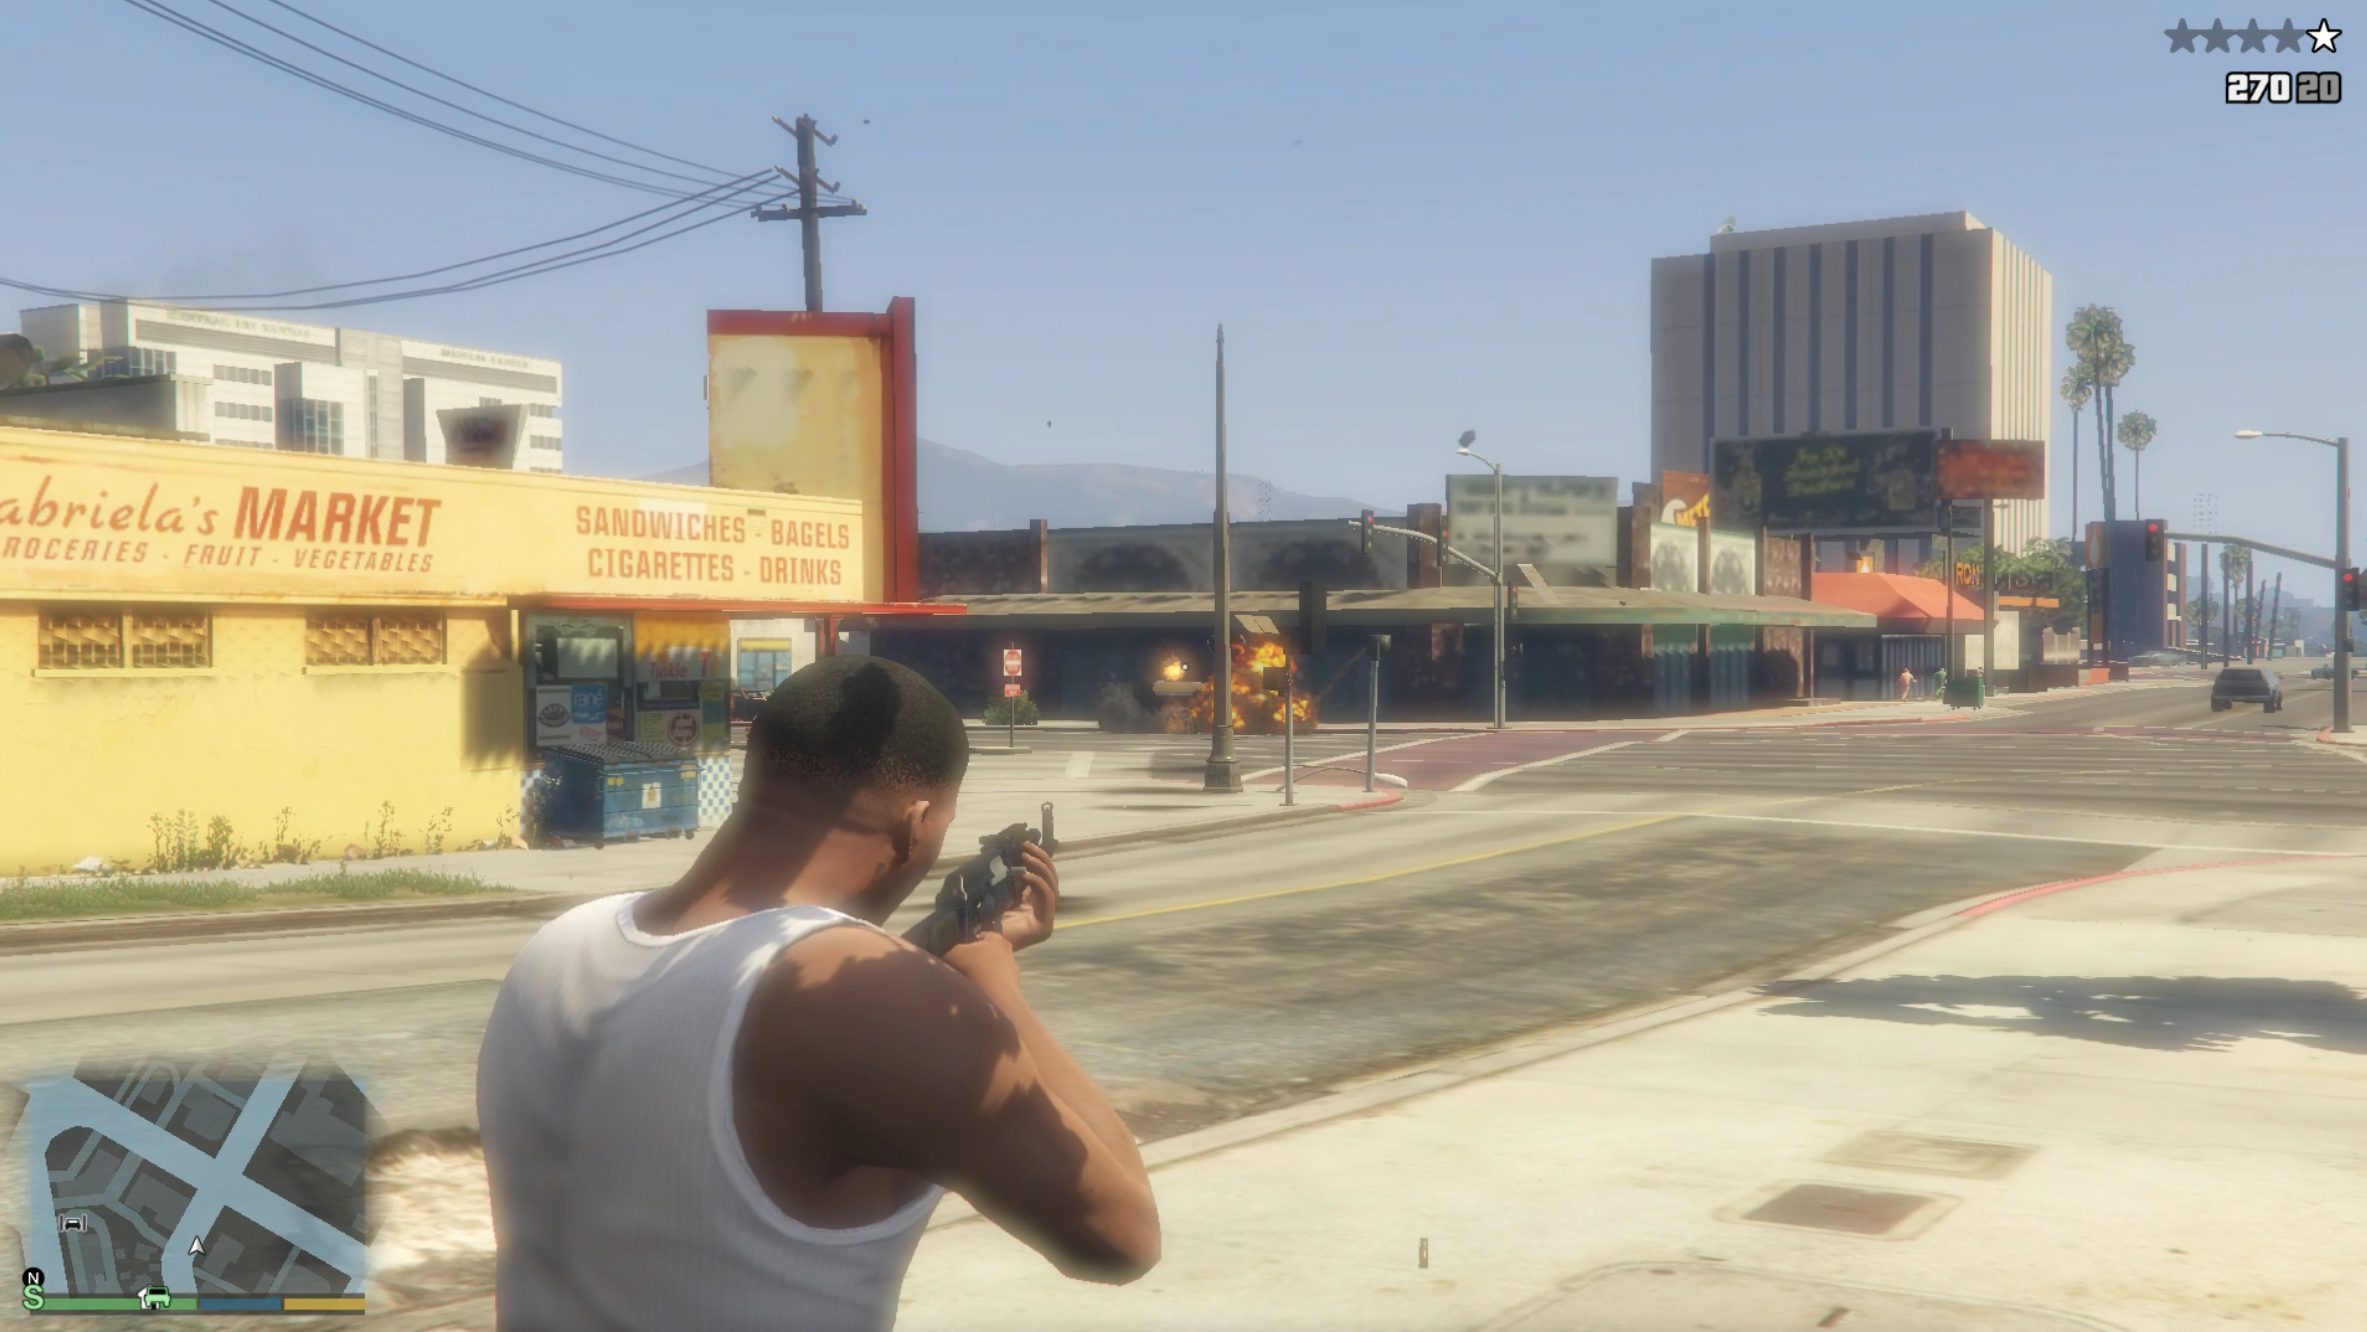 A screenshot from Grand Theft Auto 5, showing the character Franklin shooting explosive bullets.